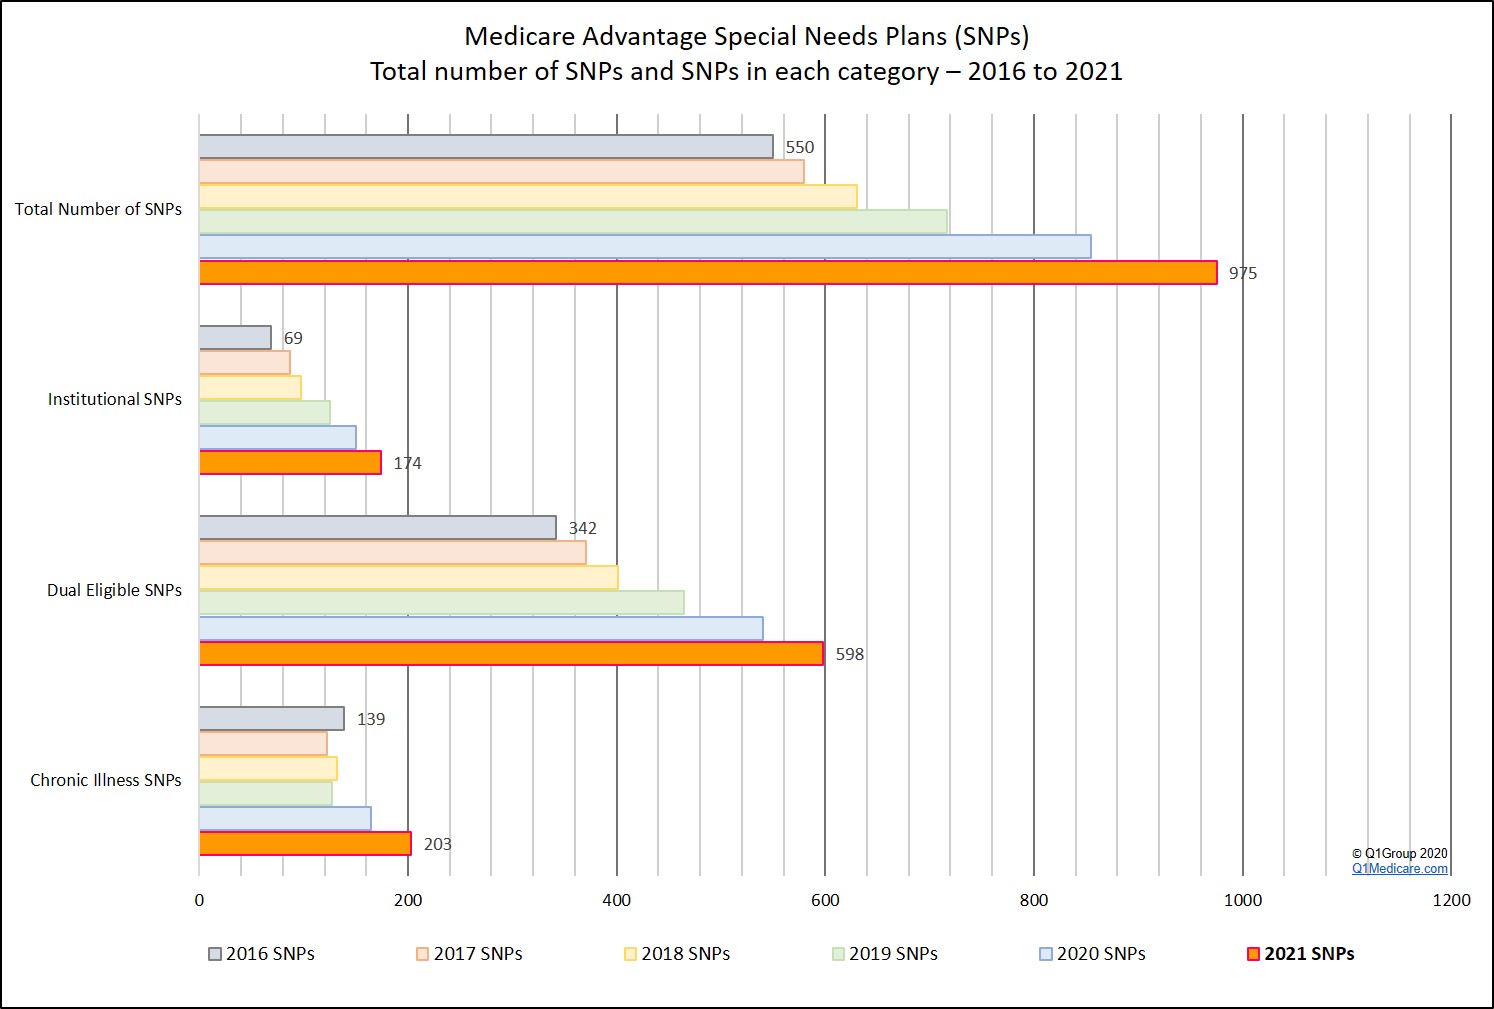 Showing the different types of Medicare Advantage Special Needs Plans (SNPs) over the years